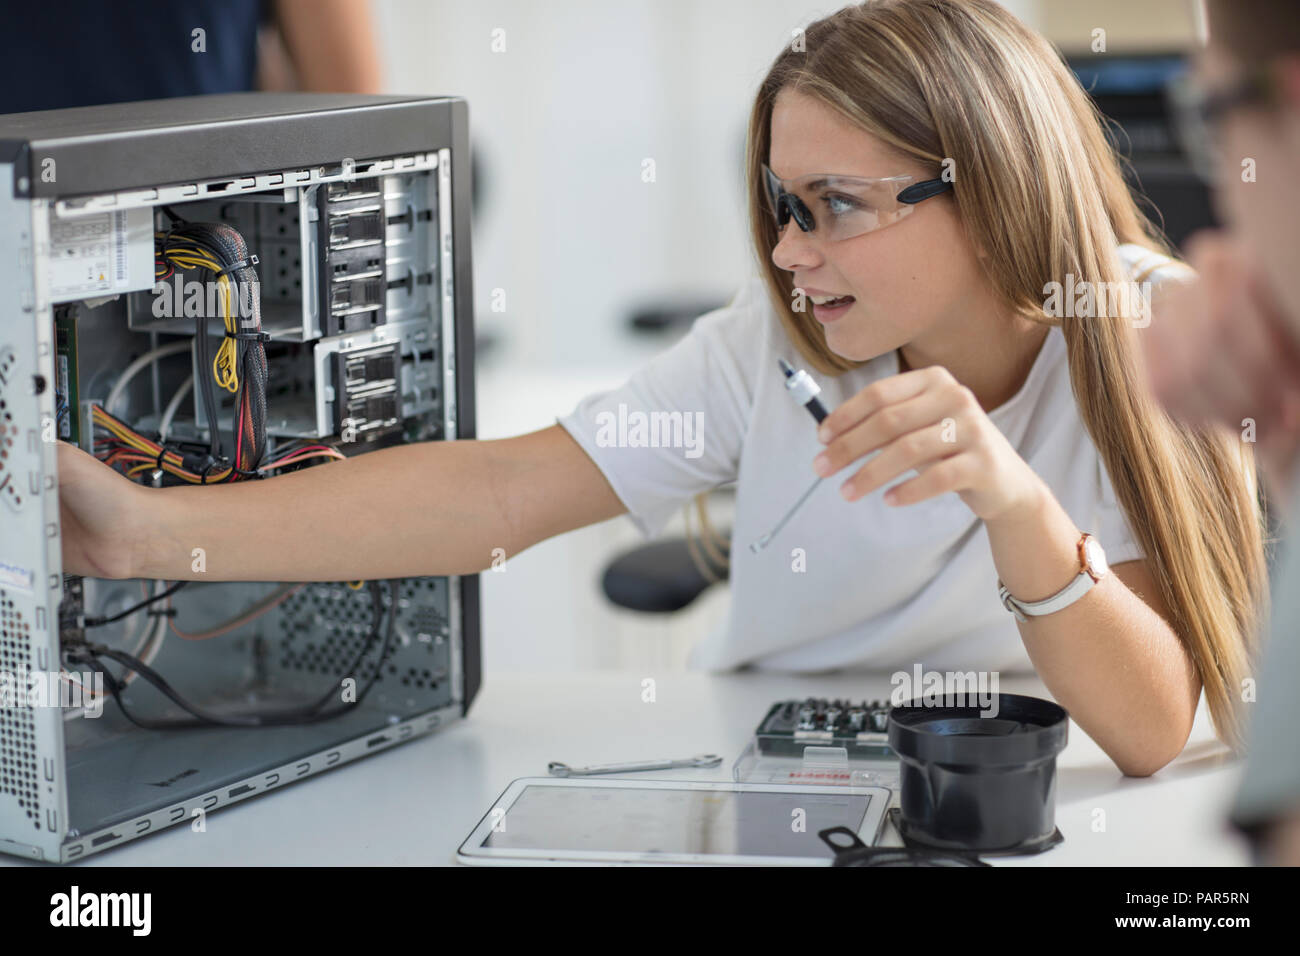 Students assembling computer in class Stock Photo